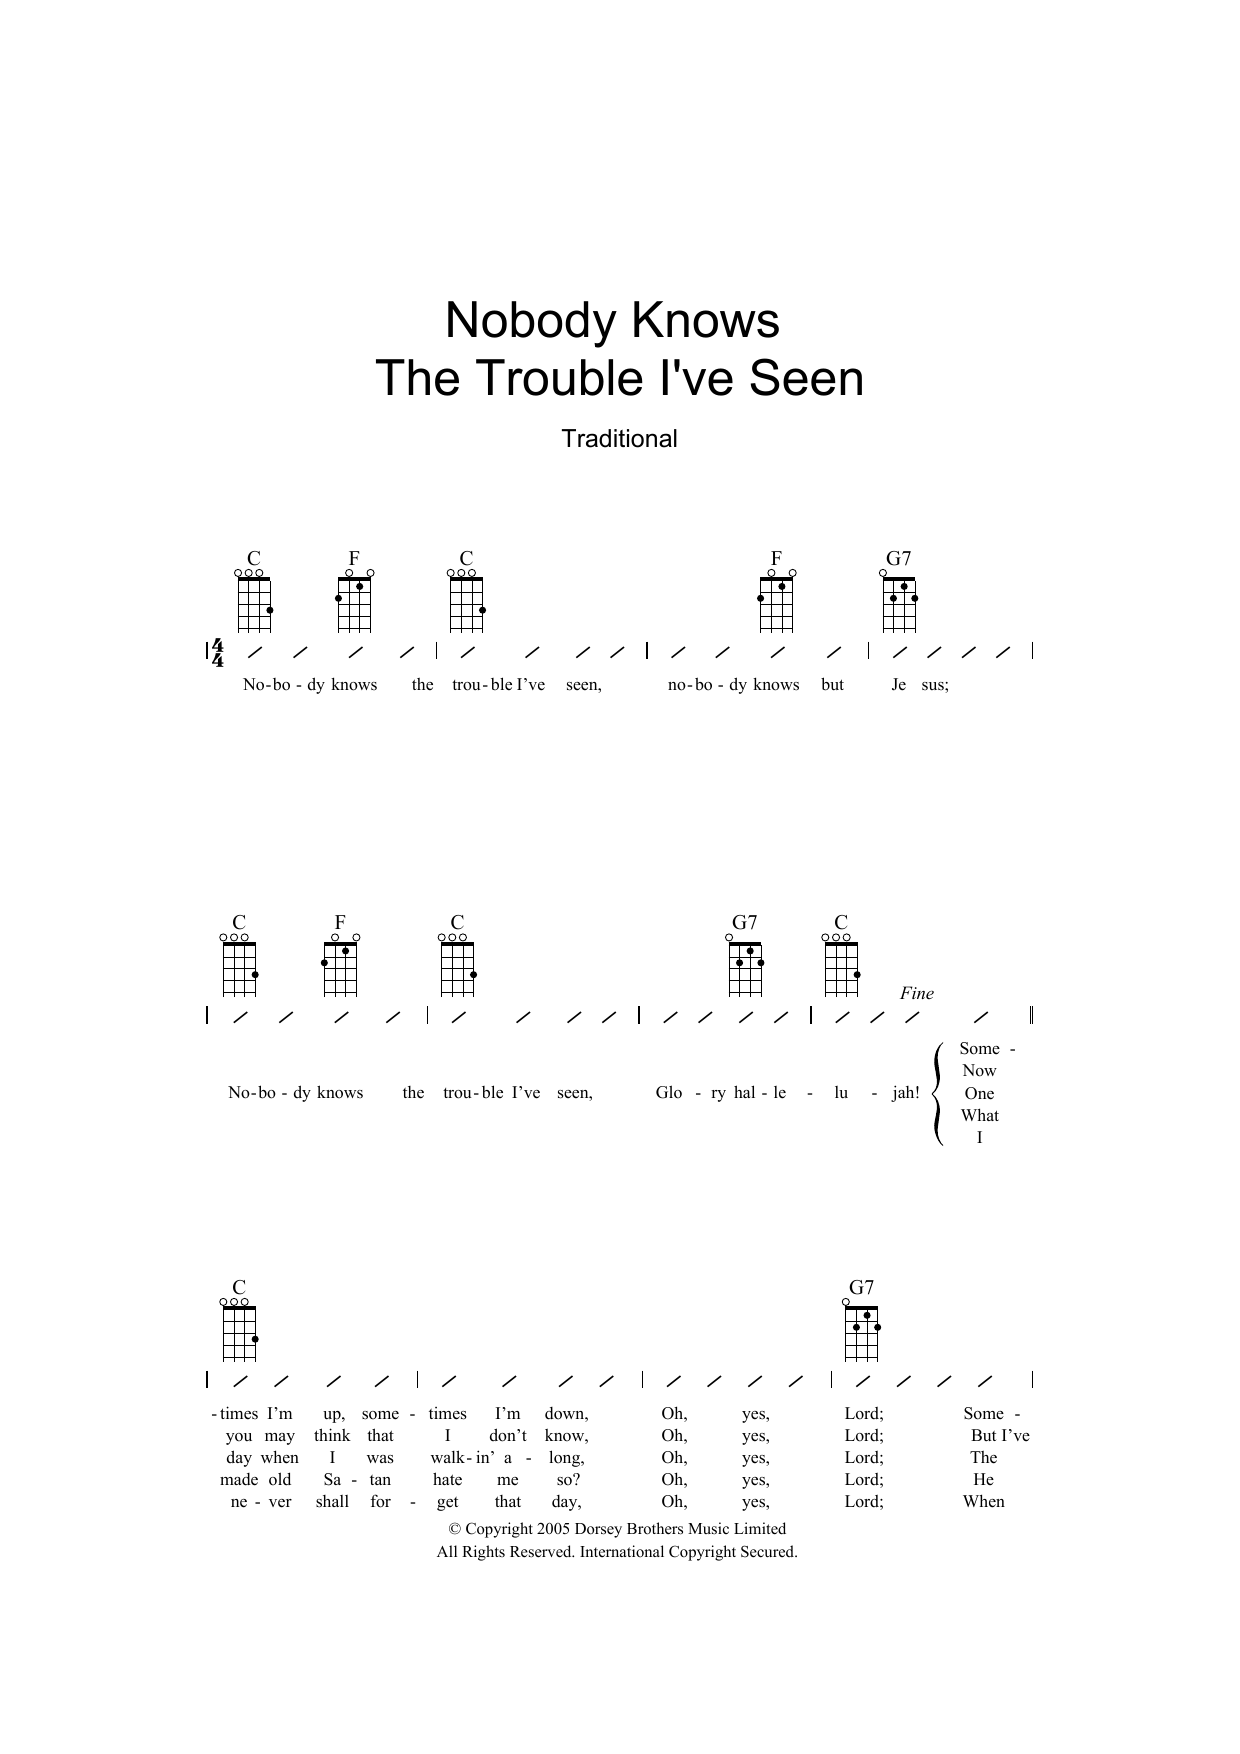 Download Traditional Nobody Knows The Trouble I've Seen Sheet Music